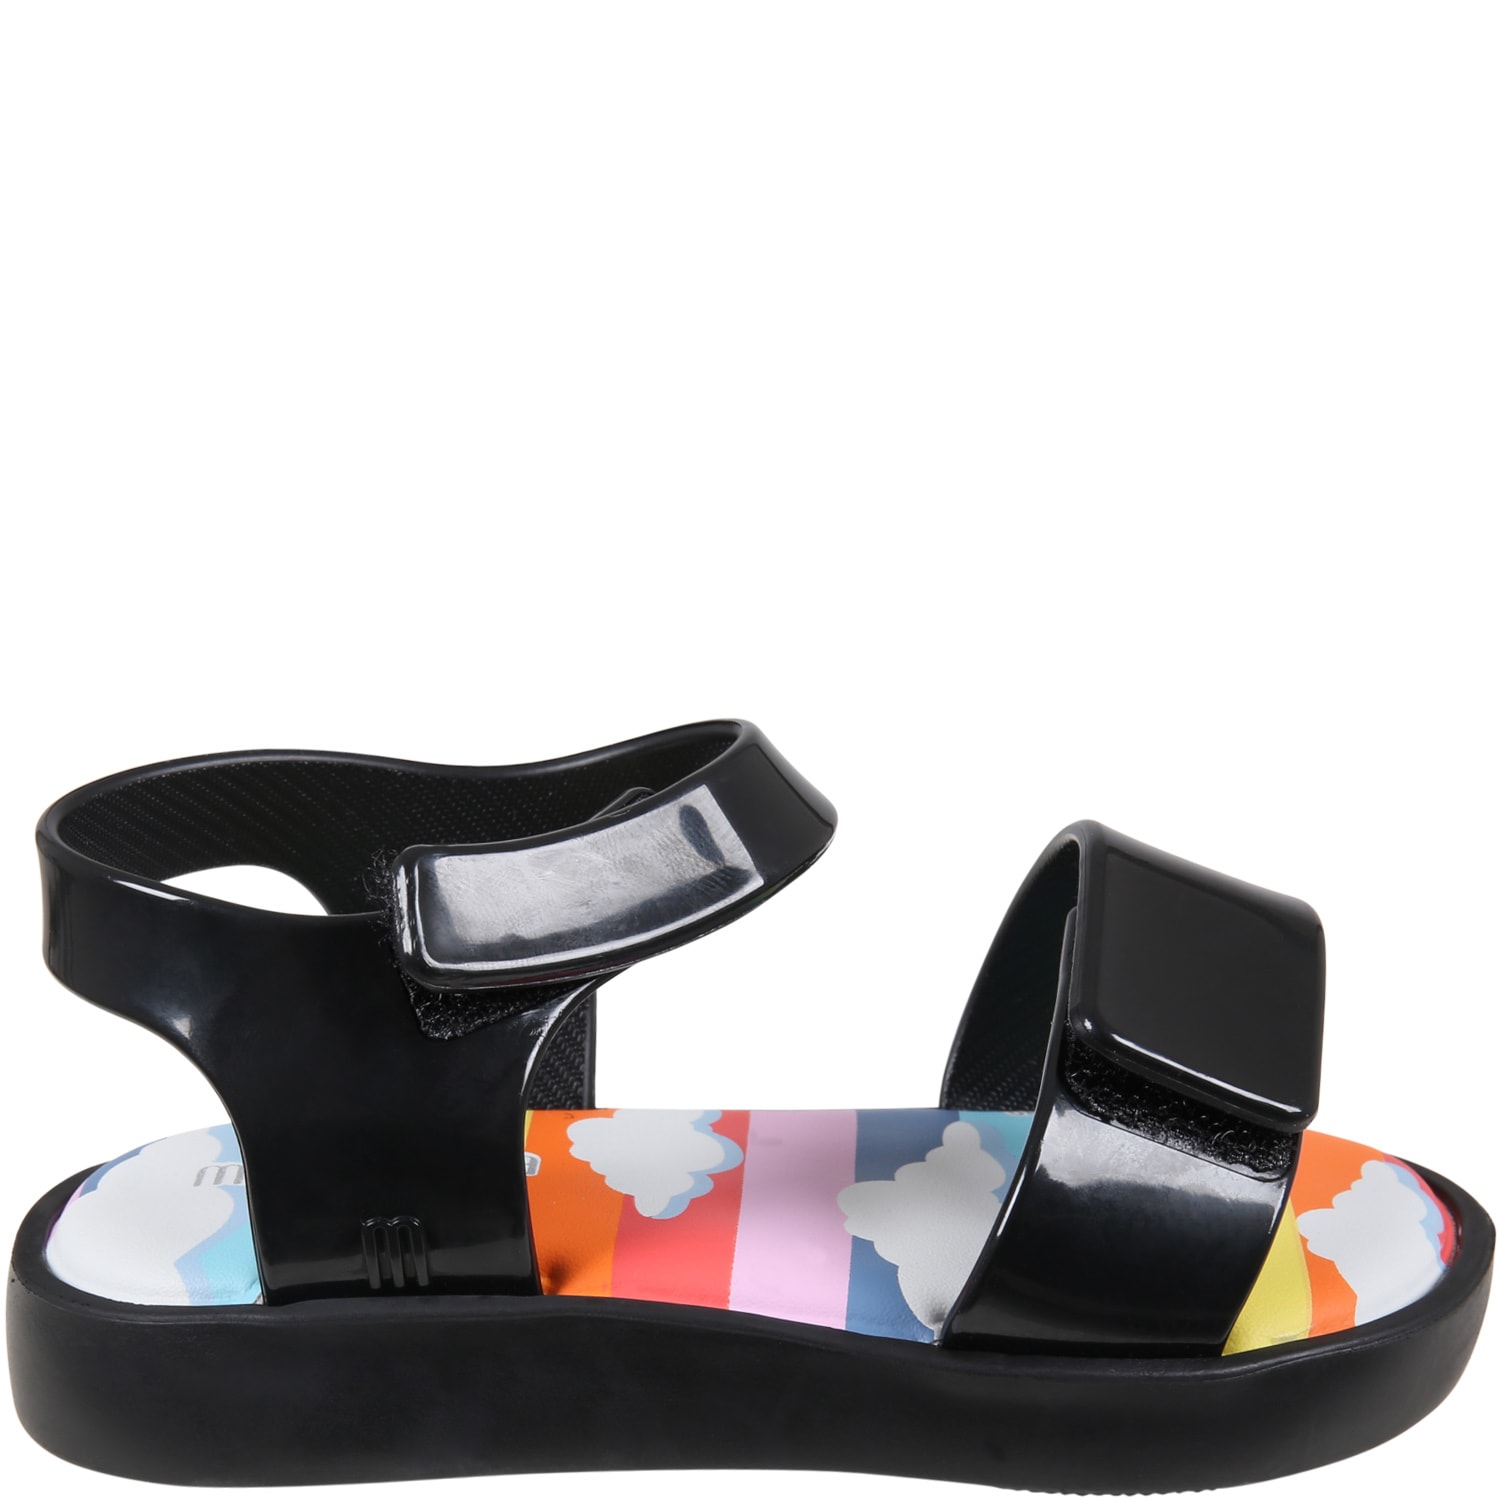 Melissa Black Sandals For Kids With Clouds